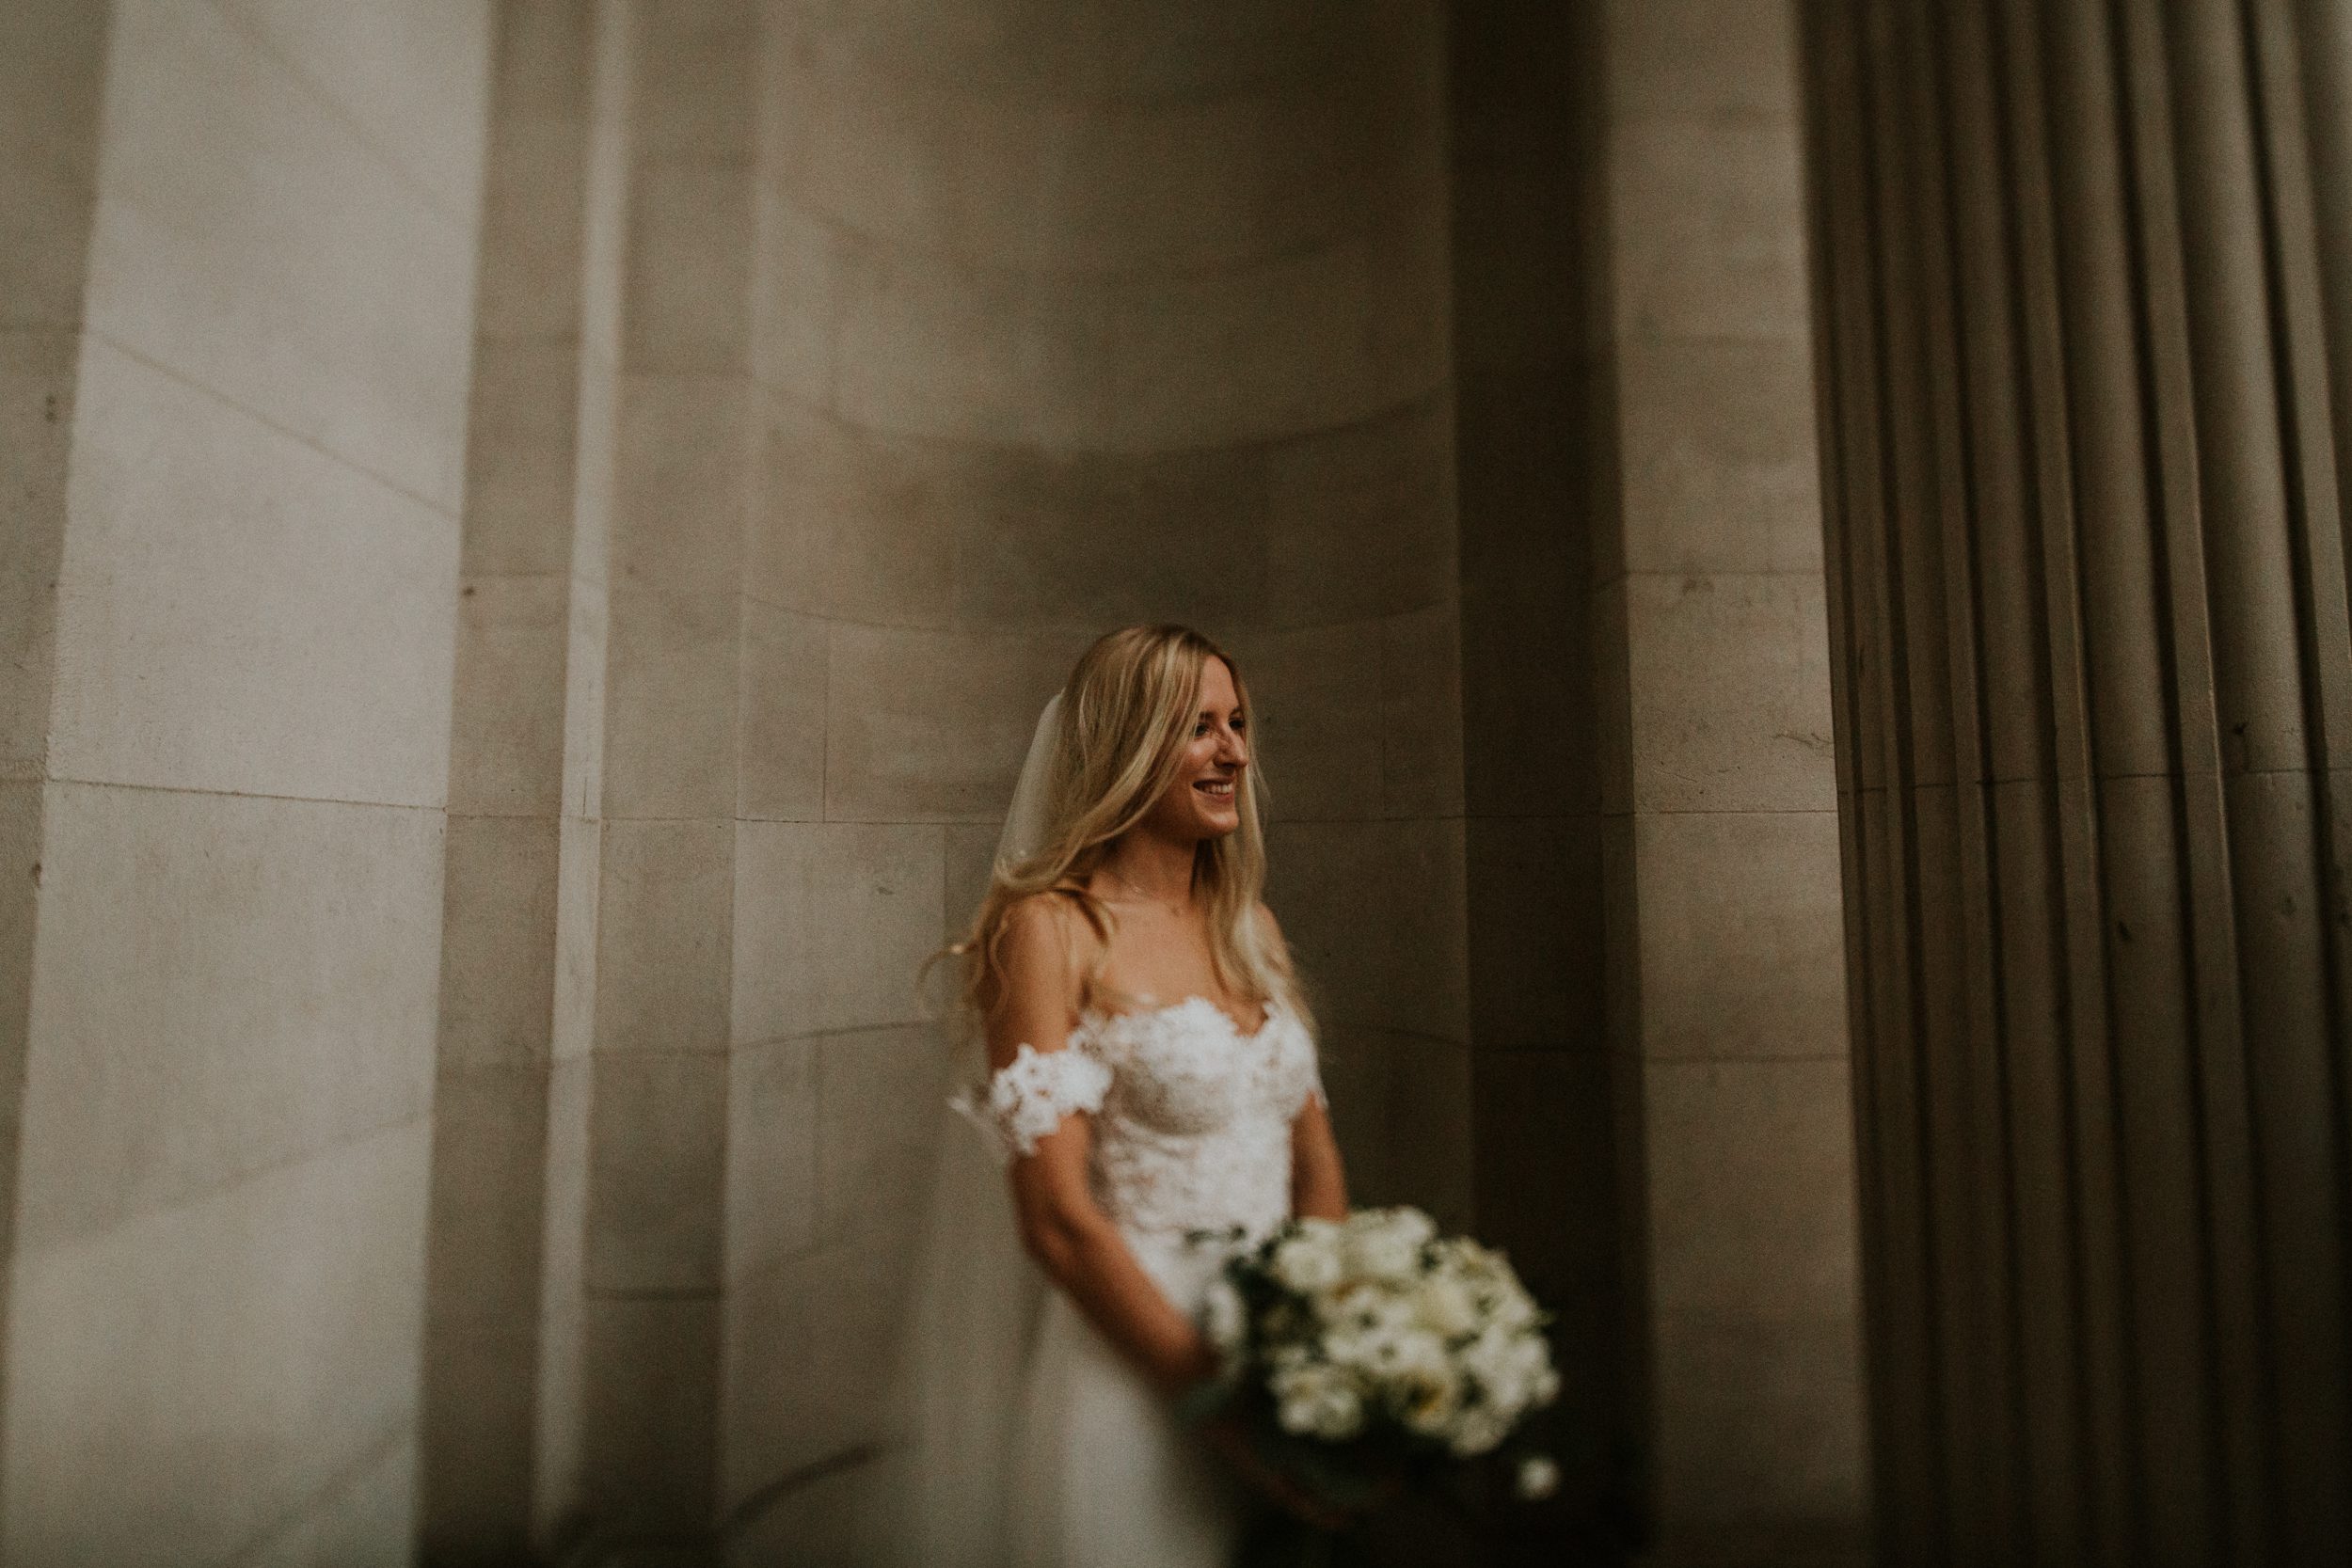 A happy bride poses for a photo after her wedding ceremony at Old Marylebone Town Hall, London